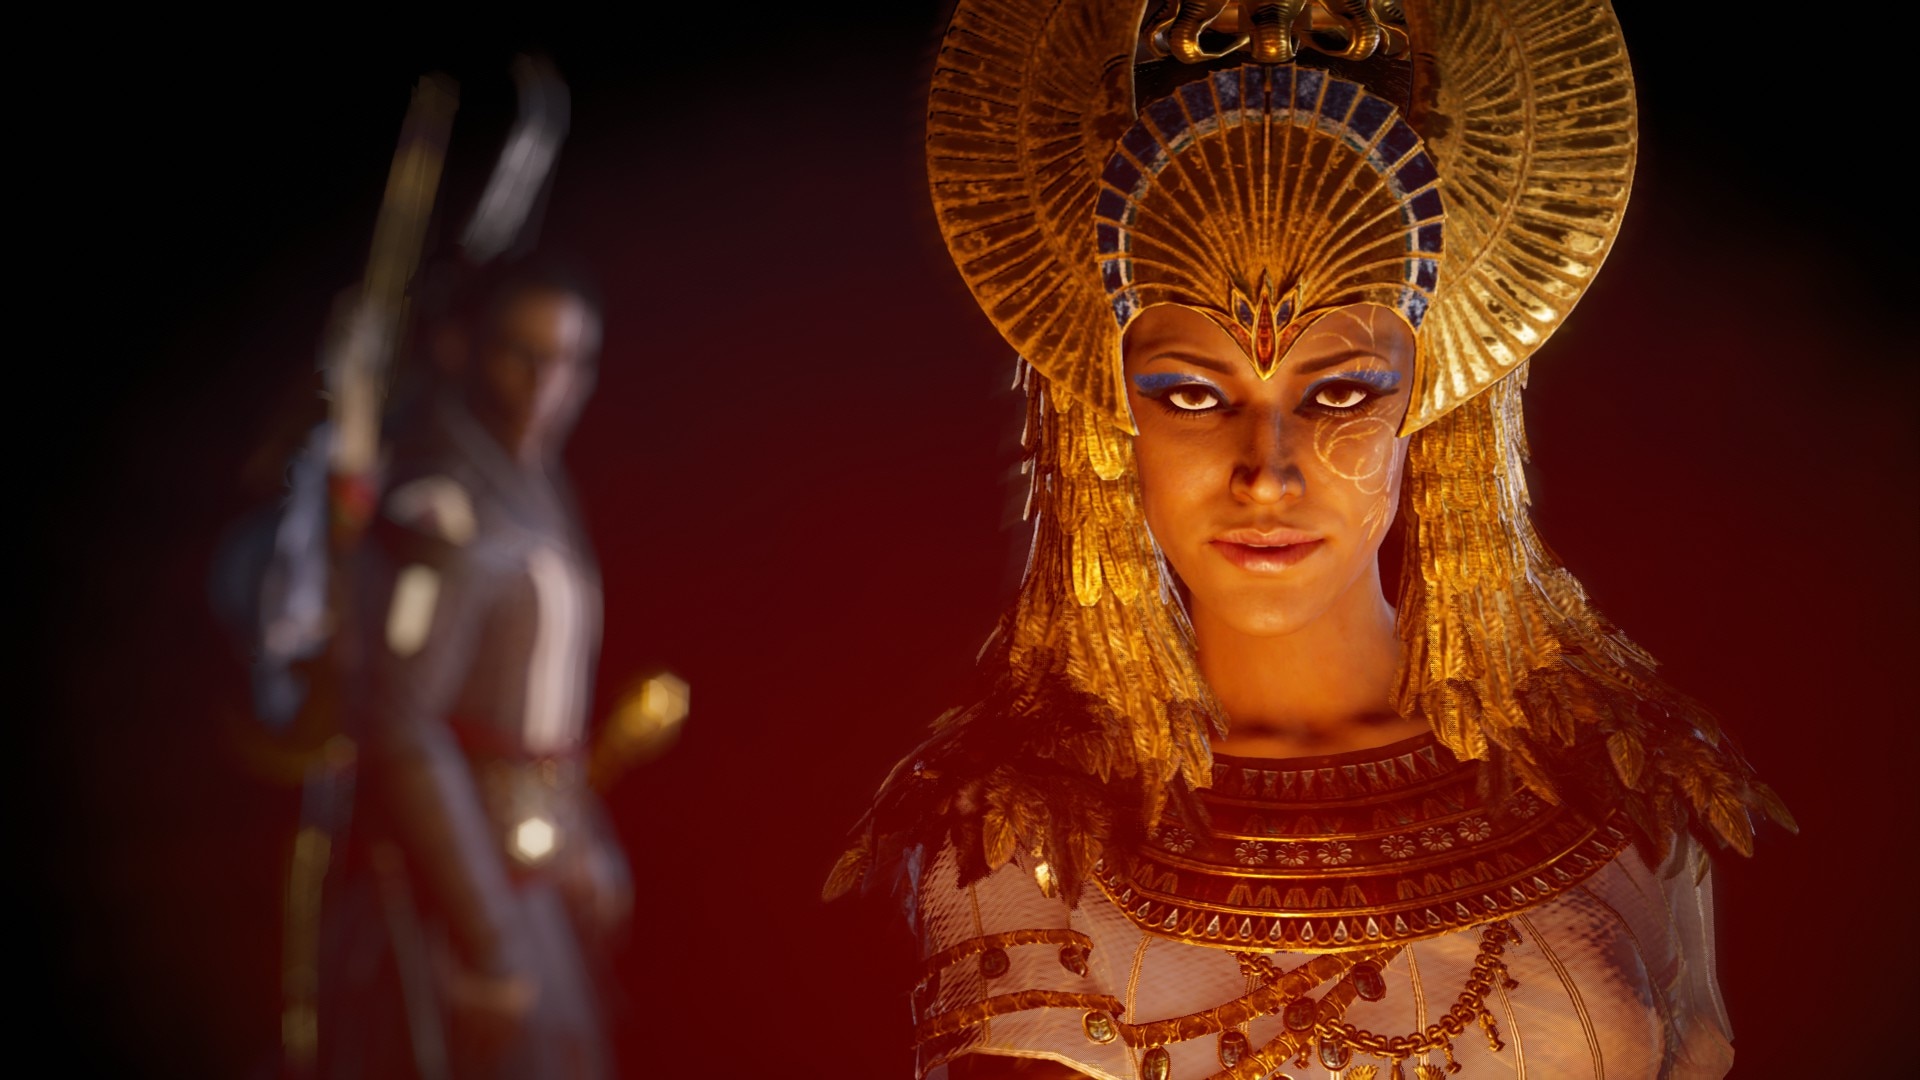 Assassin`s Creed Origins (Uplay, Gift Link HB, RU+CIS) buy key for $4.98